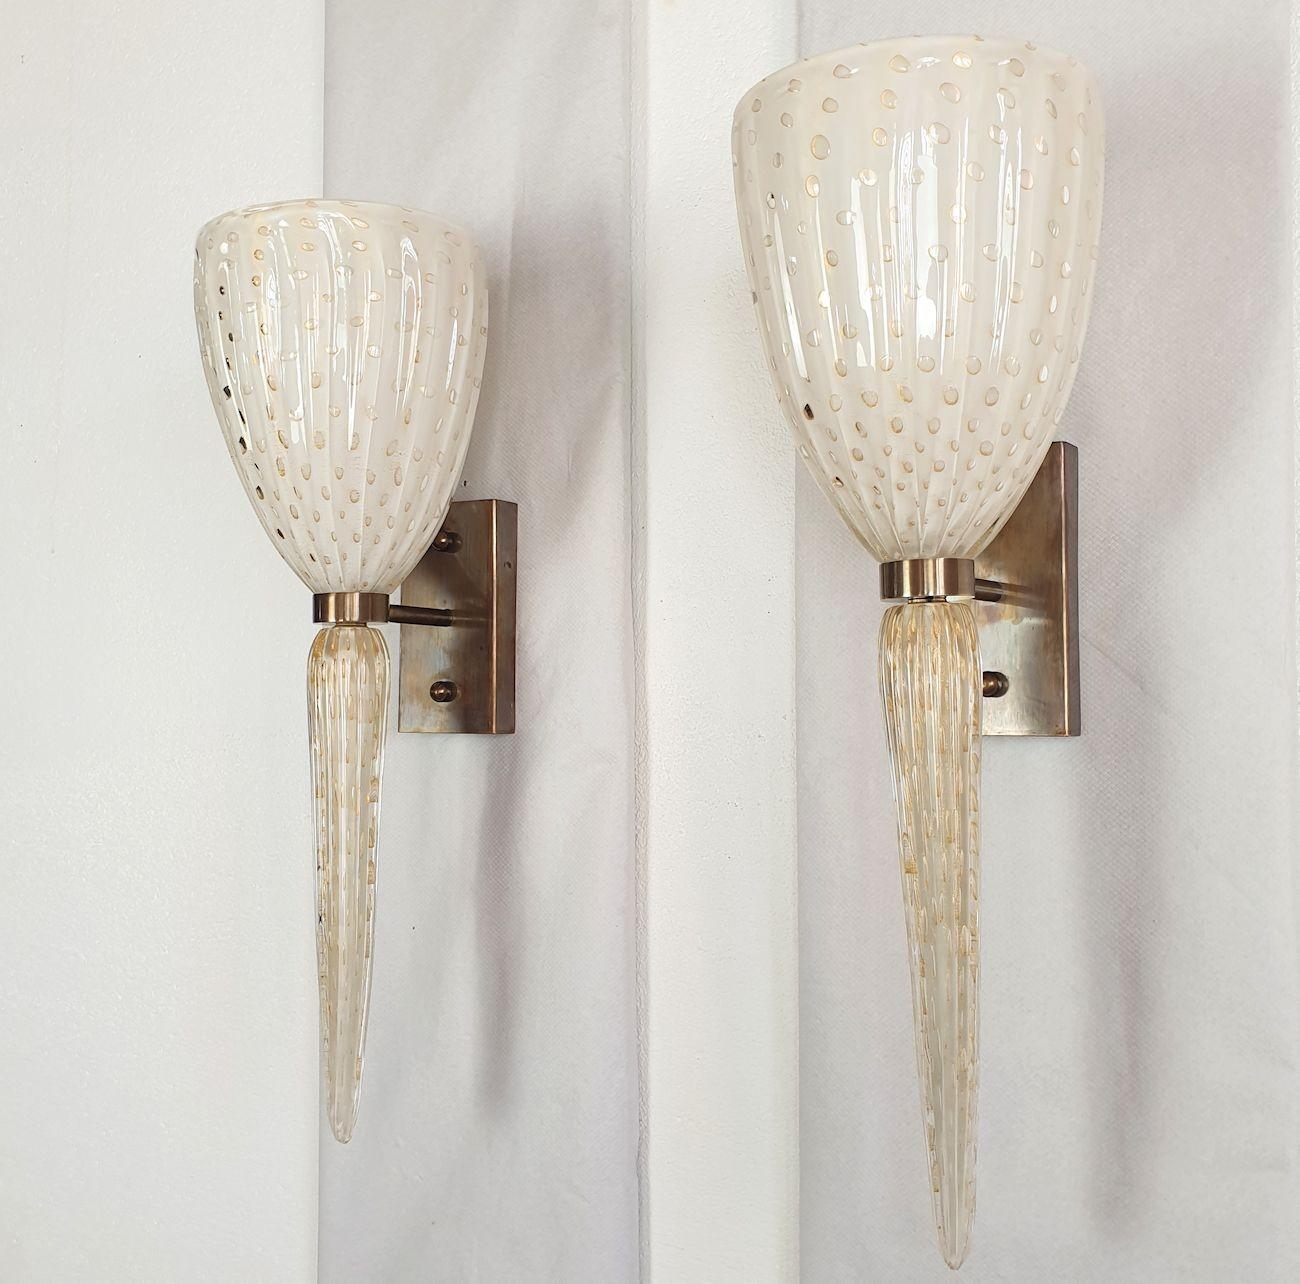 Pair of tall Neoclassical style Murano glass wall sconces, in the style of Venini, Italy 1970s.
The mid century modern sconces are in handmade Murano glass and burnished brass mounts.
The top shade is white, with an air bubbles circled by gold